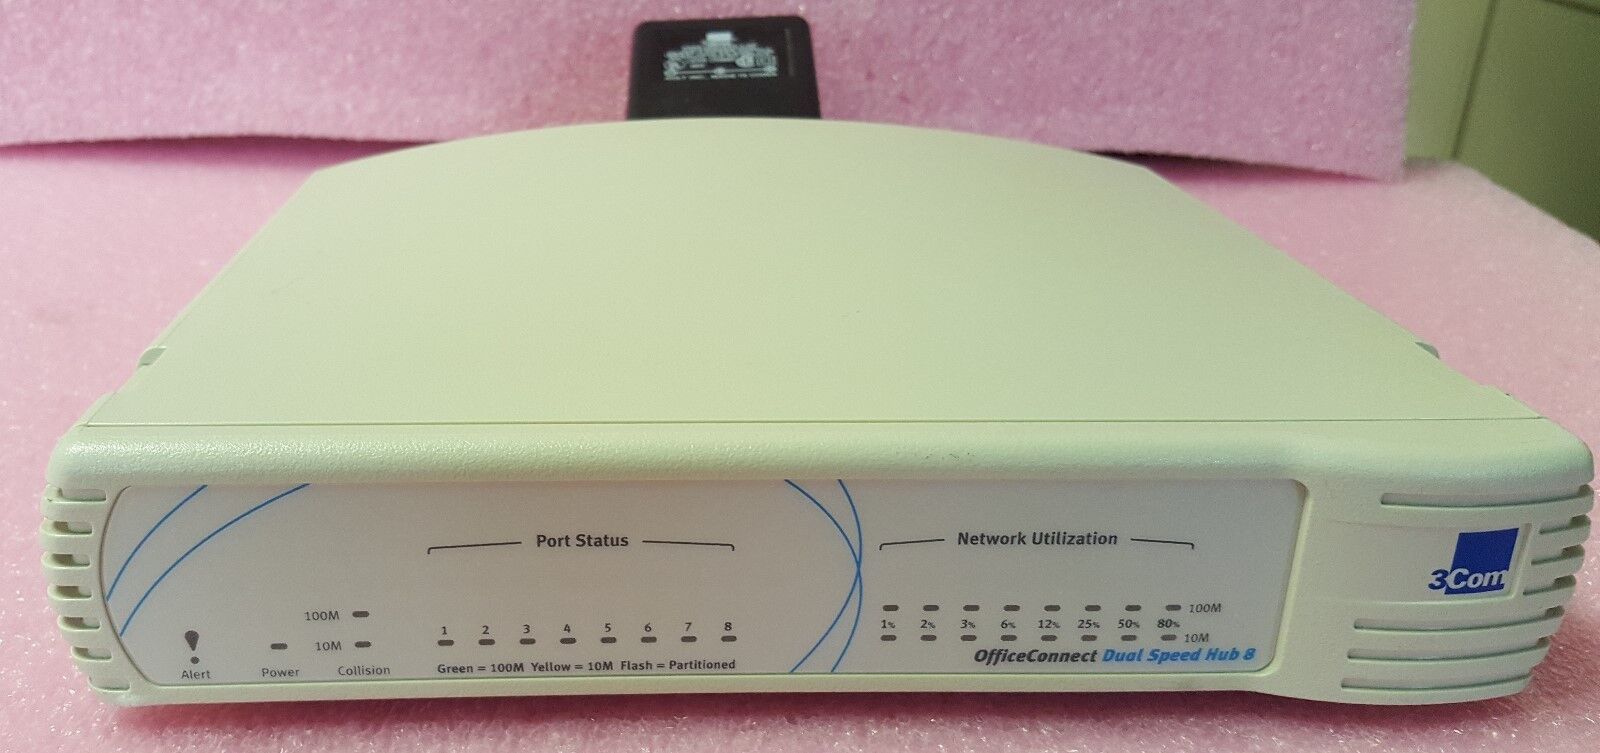 3COM Office Connect Dual Speed 8 Port 1675-010-051-1.01  3C16750B Working,Tested